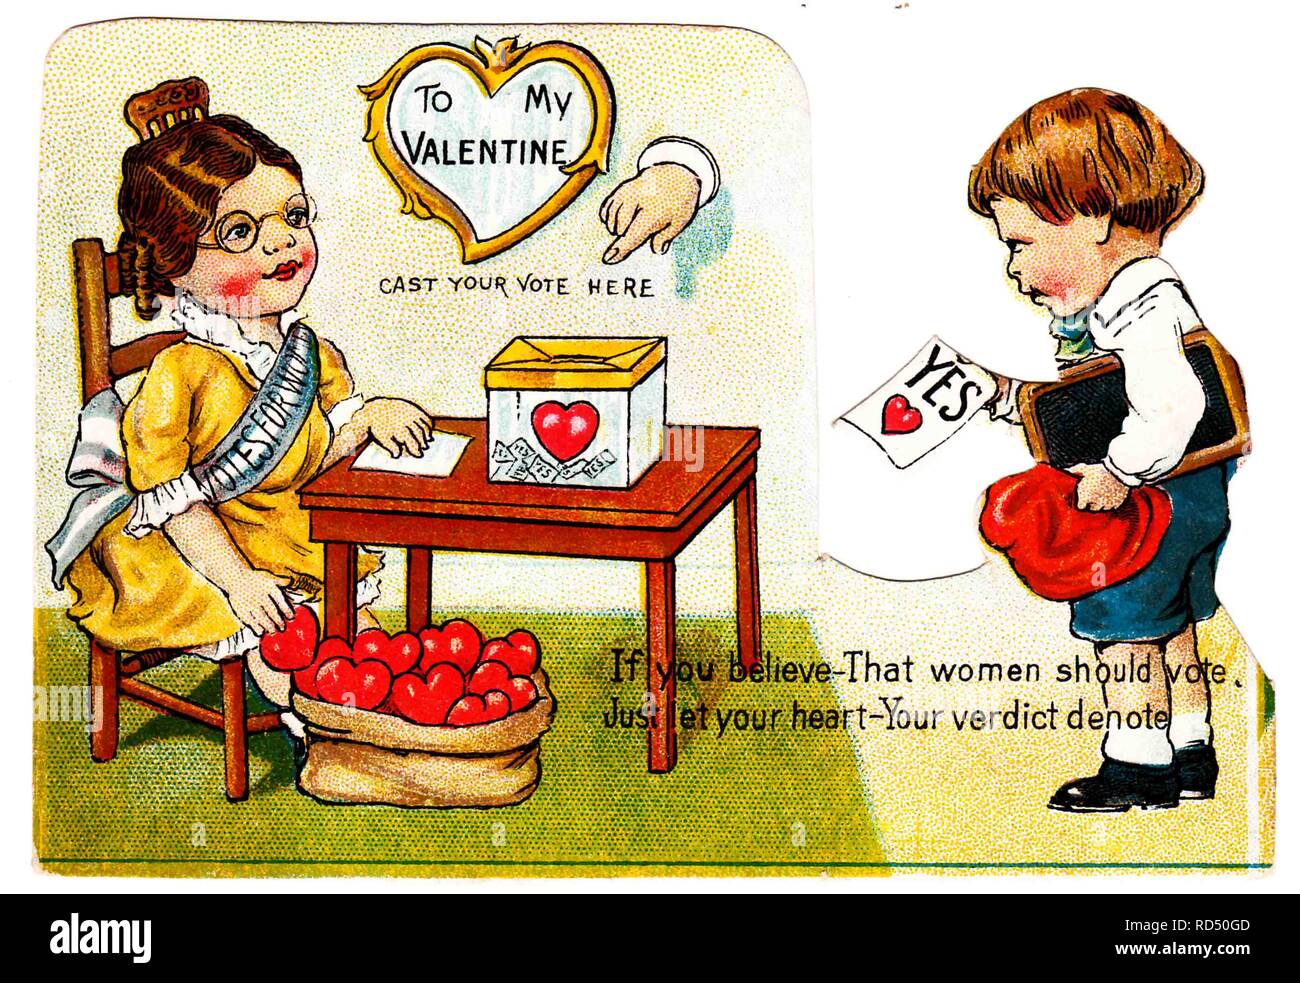 Suffrage-era, die-cut Valentine card, depicting a small schoolboy bringing his teacher a valentine marked 'Yes, ' illustrating his support for her right to vote; his spectacled teacher, wearing a yellow dress and a 'Votes for Women' sash, sits at a table with a ballot box, and draws a heart from a sack at her feet; with the text 'If you believe - That women should vote, Just let your heart - Your verdict denote', 1900. () Stock Photo